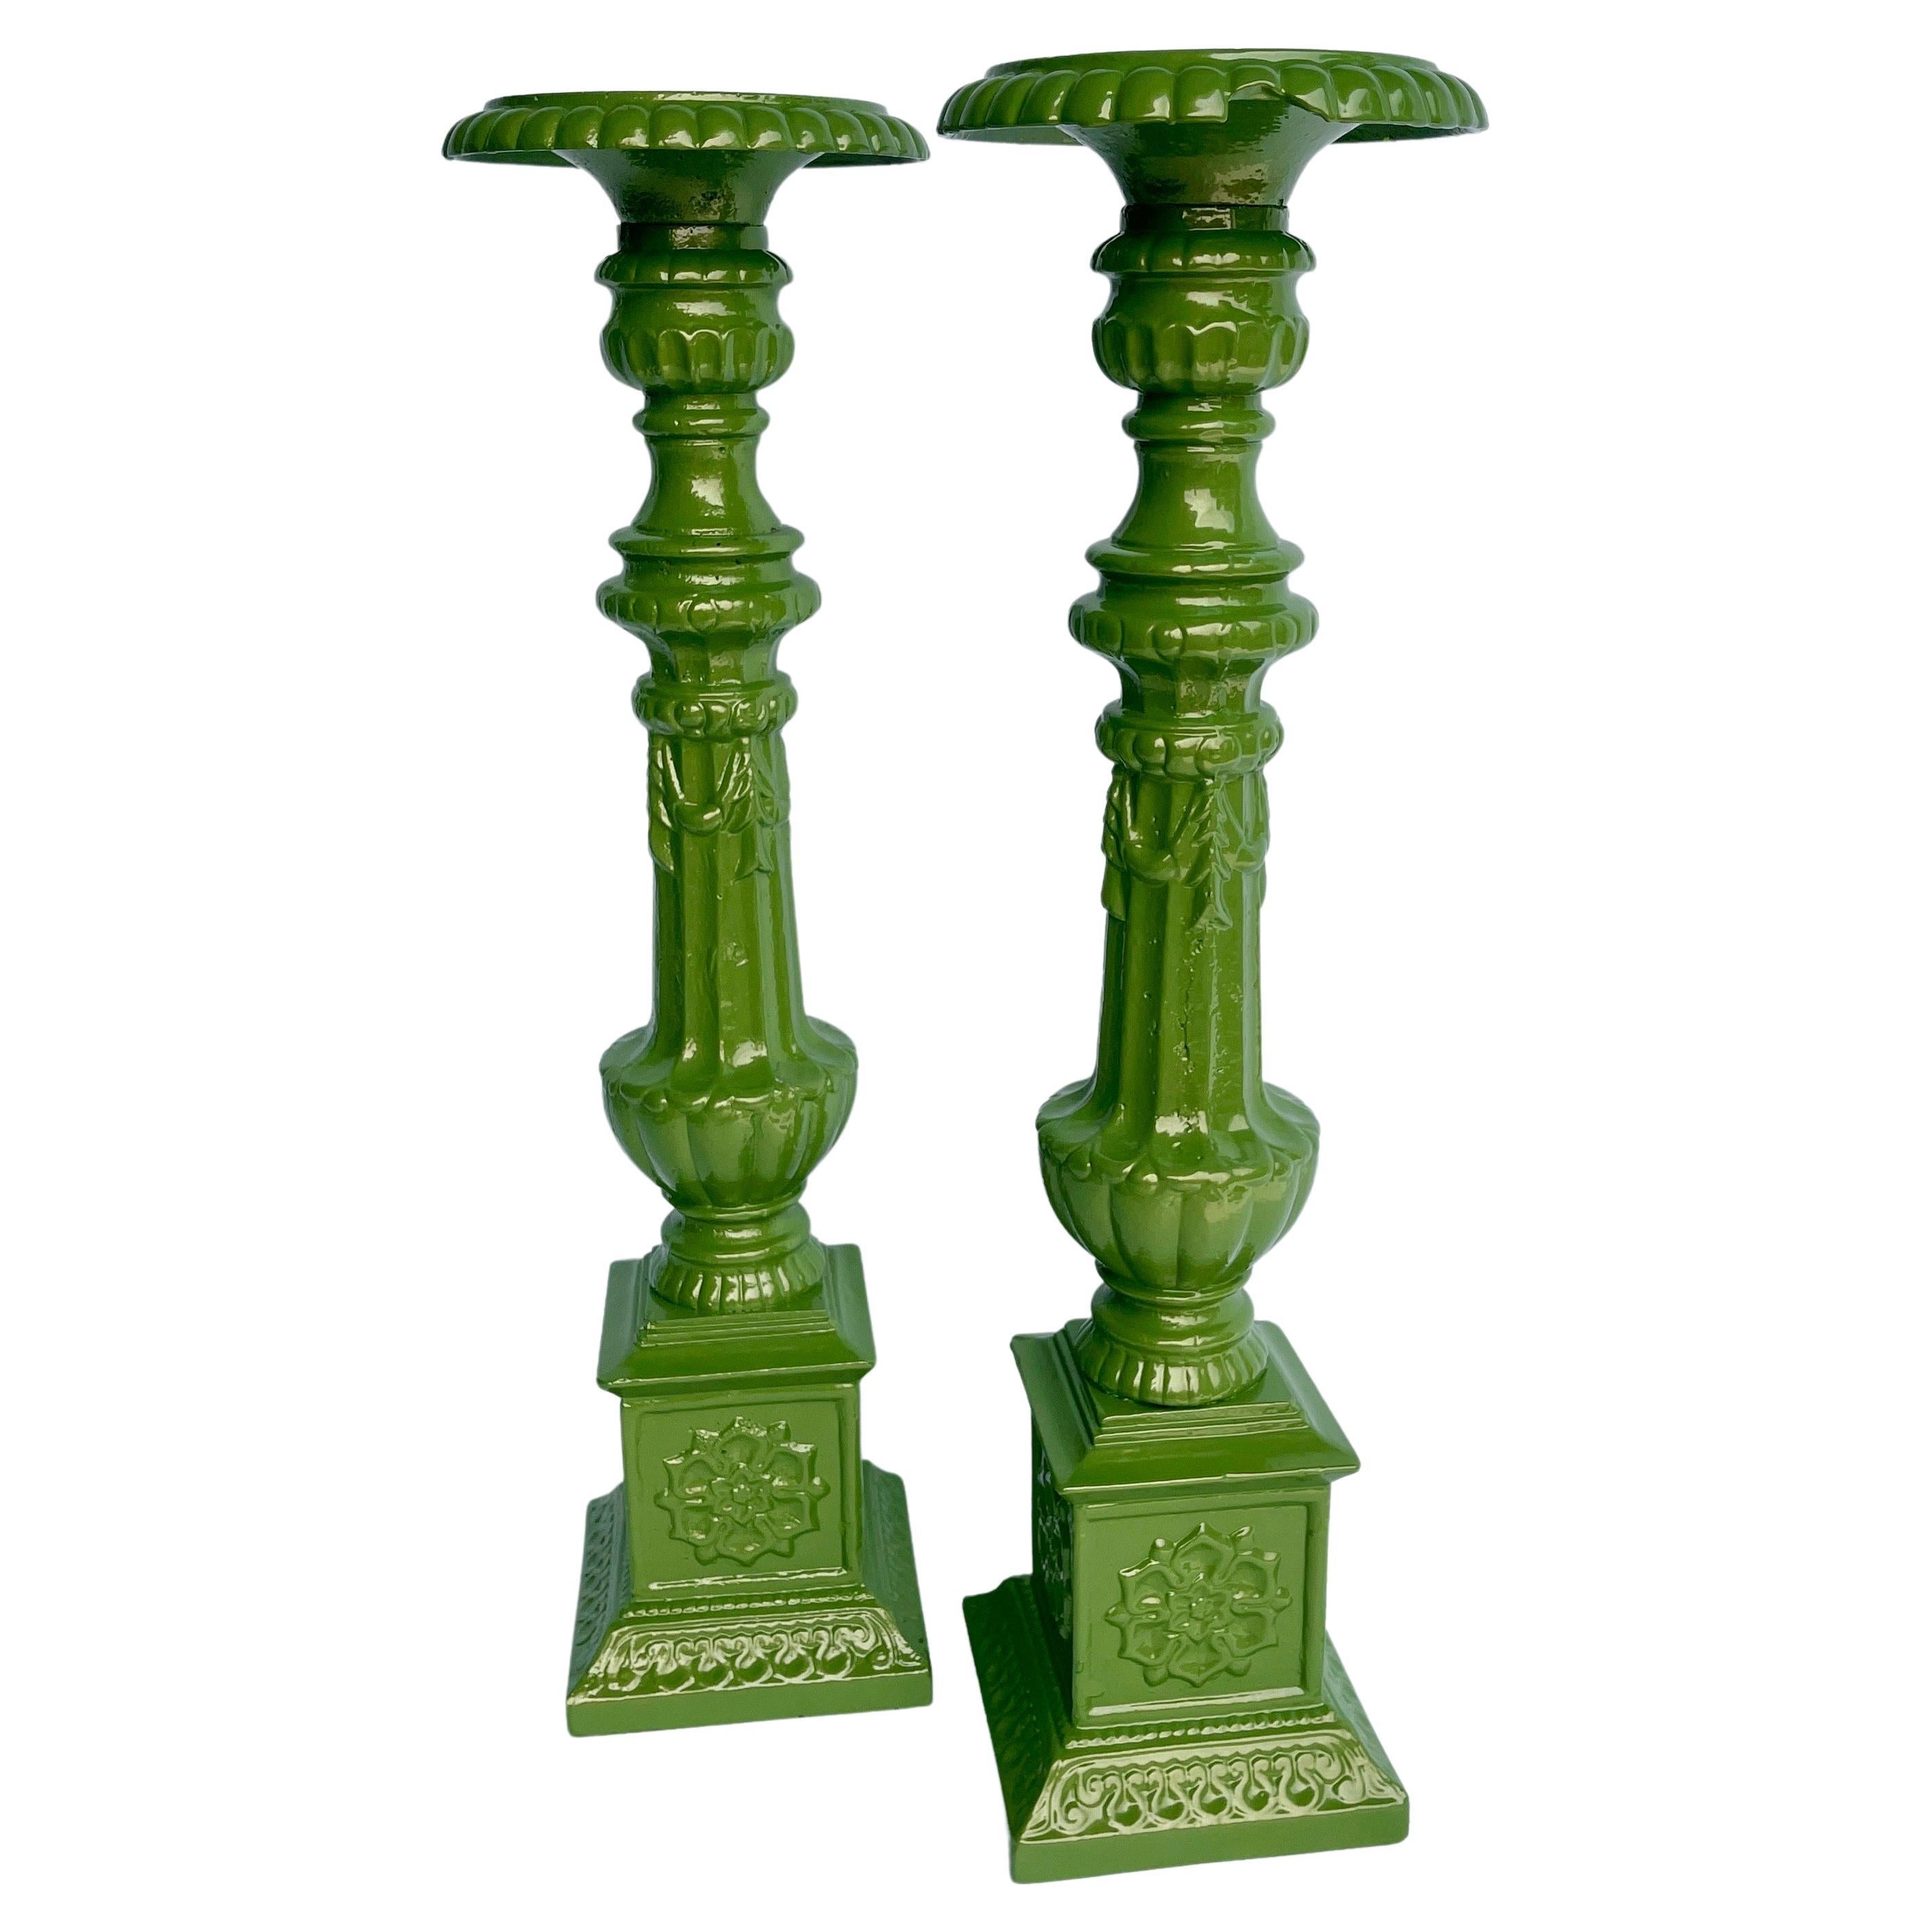  Cast Iron Powder-Coated Floor Table Standing Candle Holders, circa 1900's

Standing 28’ tall each, these elegant freshly powder-coated pricket candleholders are very versatile being displayed either on the floor or on a tabletop. These can be used